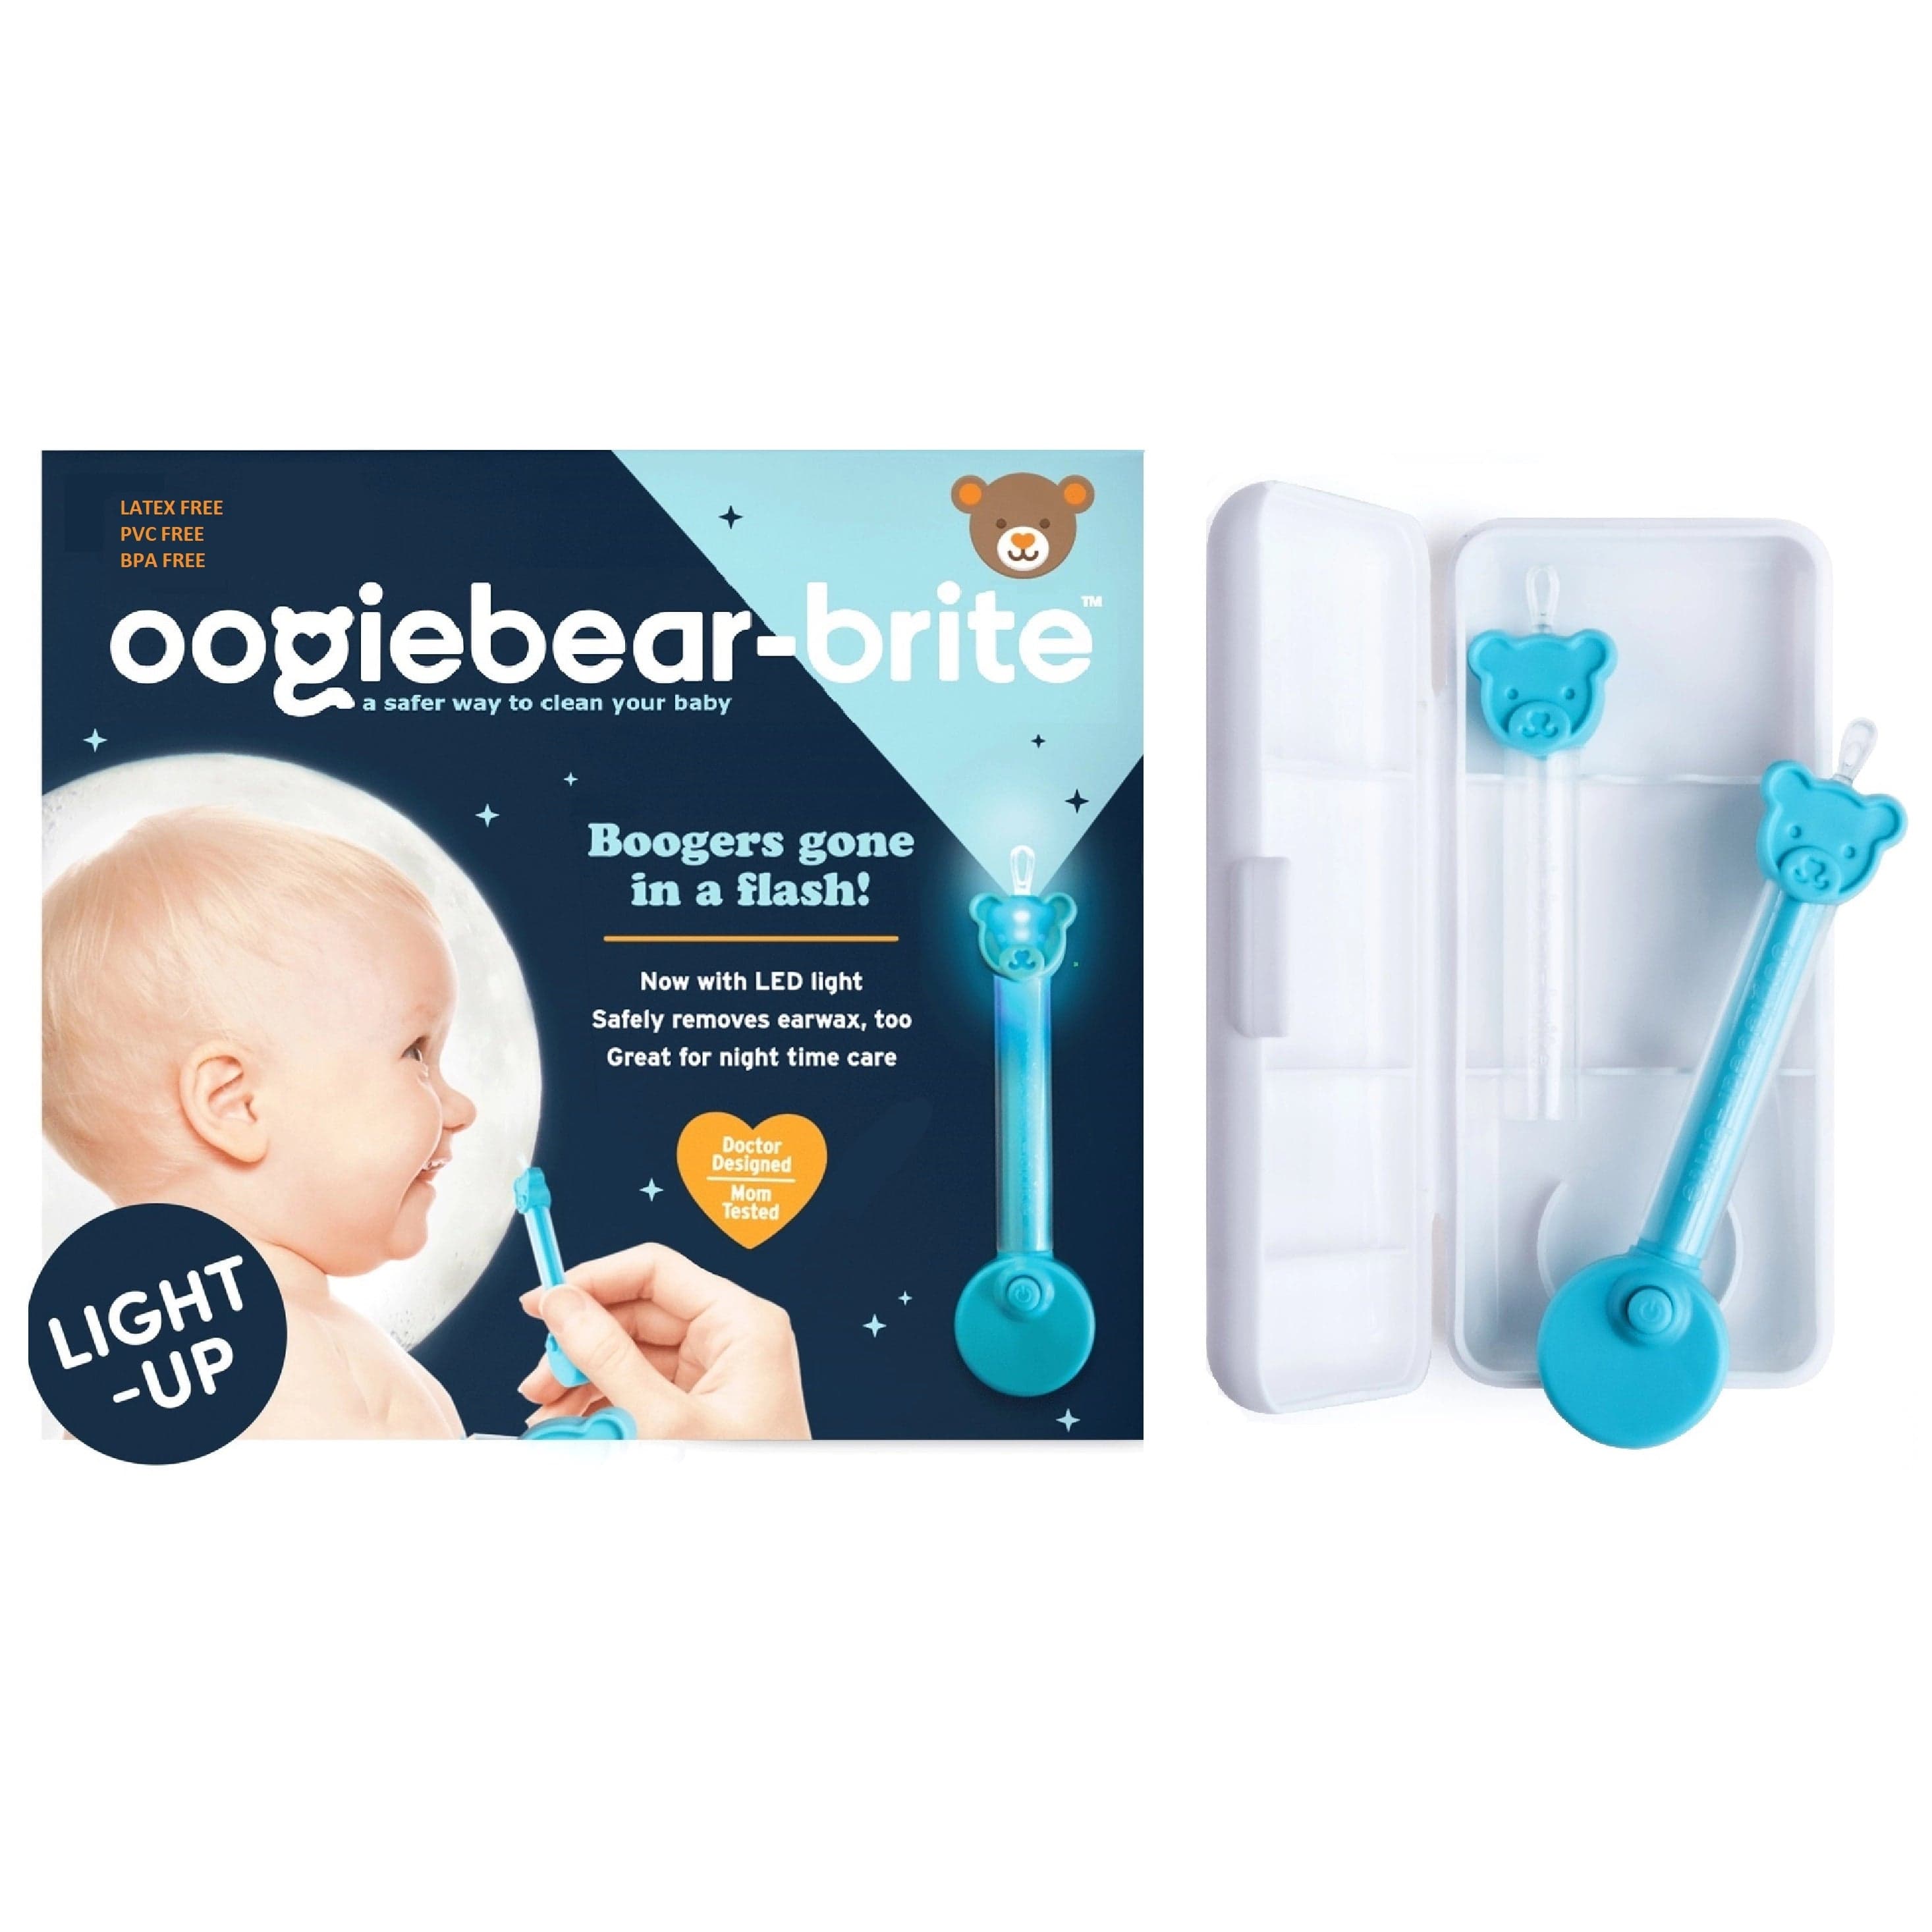 Oogiebear 2-Pack Infant Nose & Ear Cleaner with Case in Blue